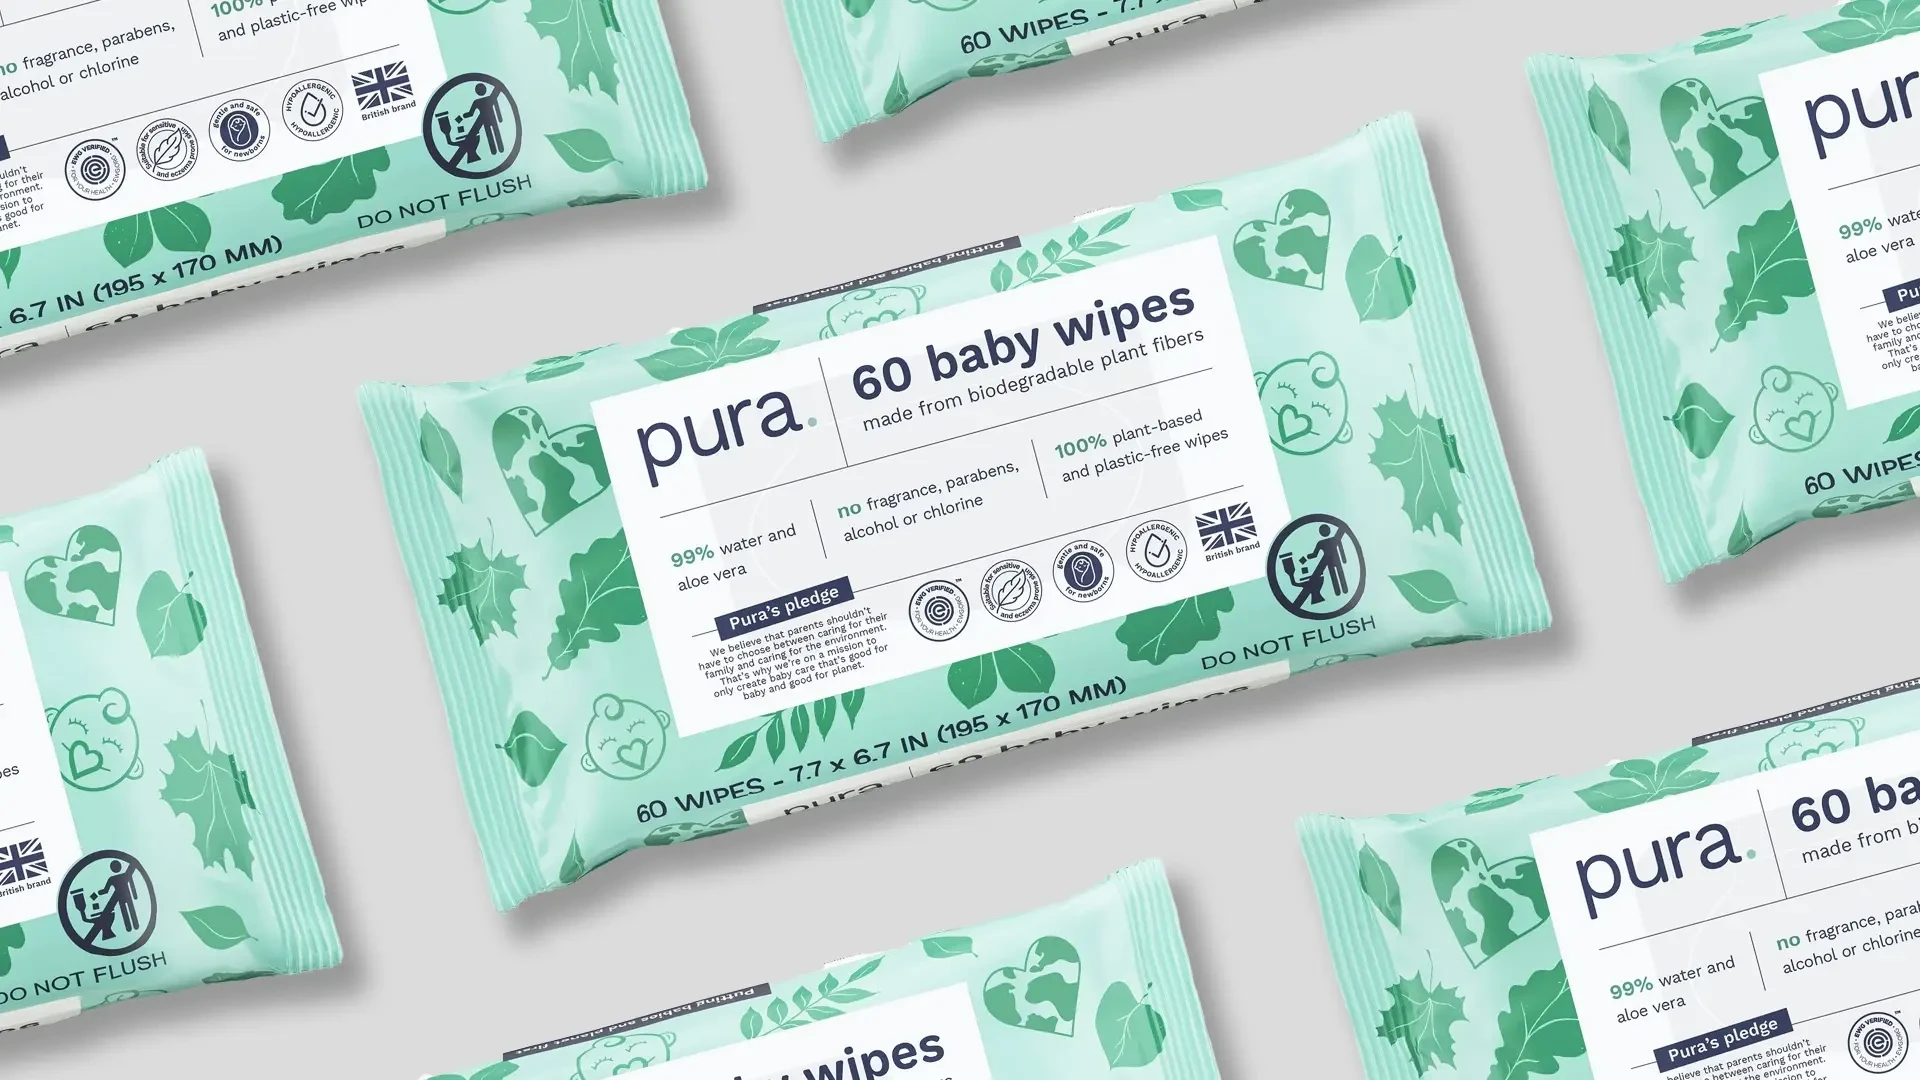 Pura wipes packages